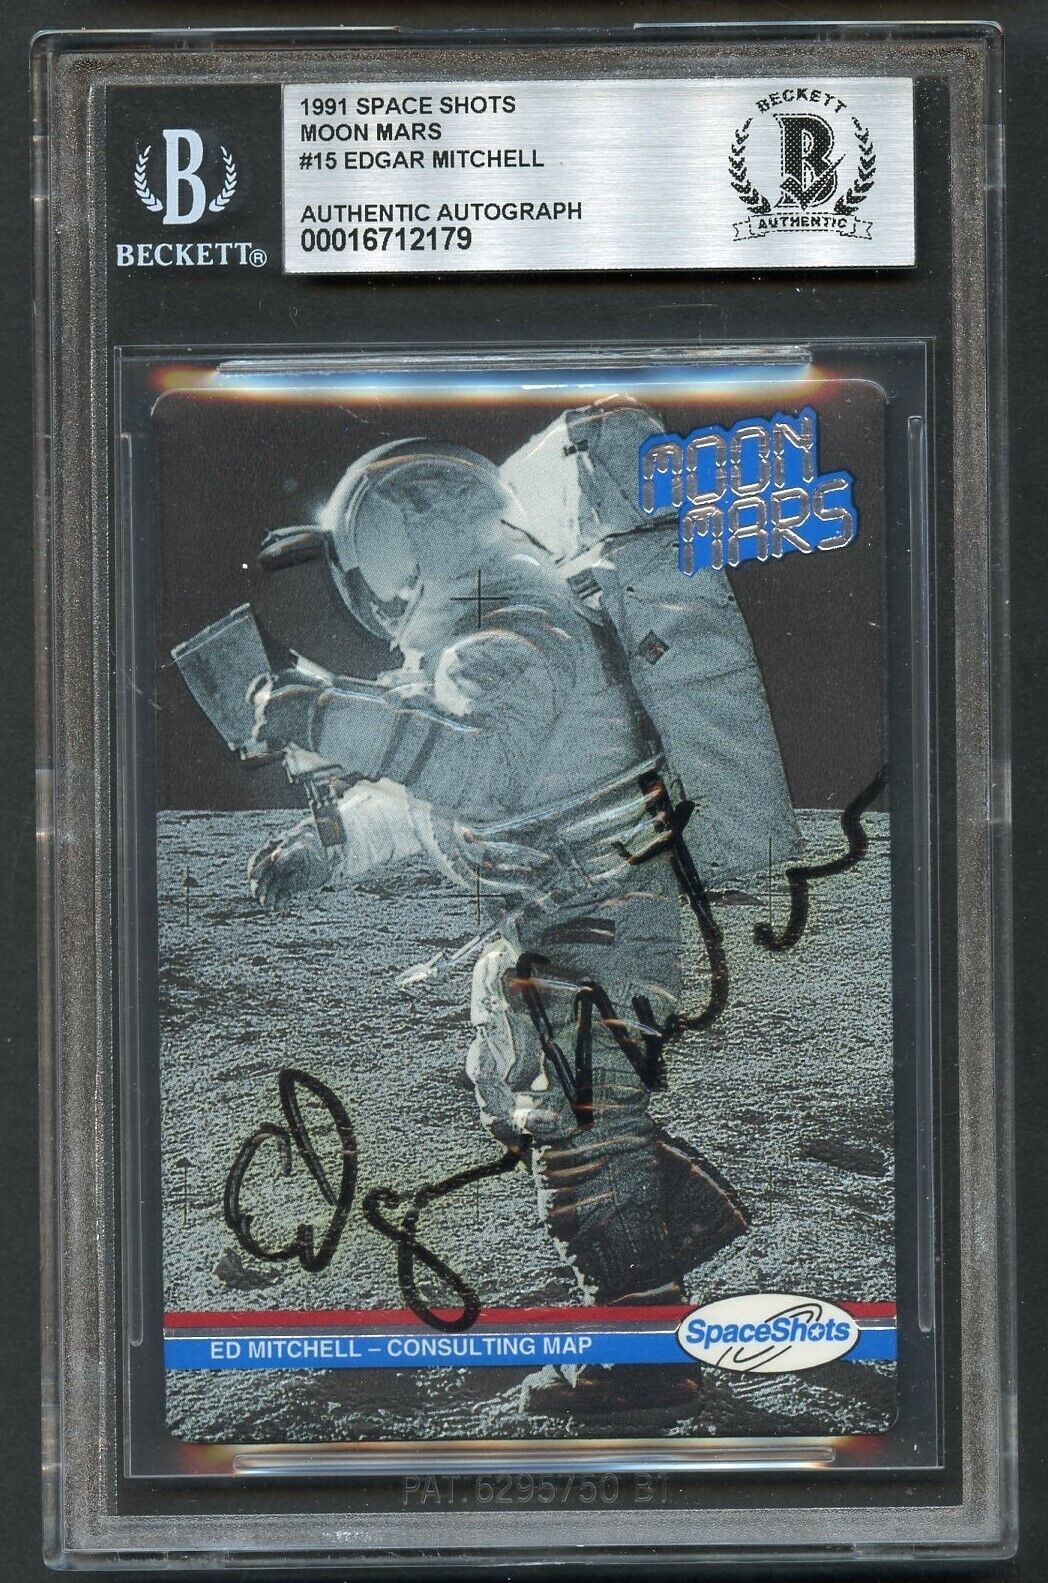 Edgar Mitchell #15 signed autograph 1991 Space Shots Moon Mars Card BAS Slabbed